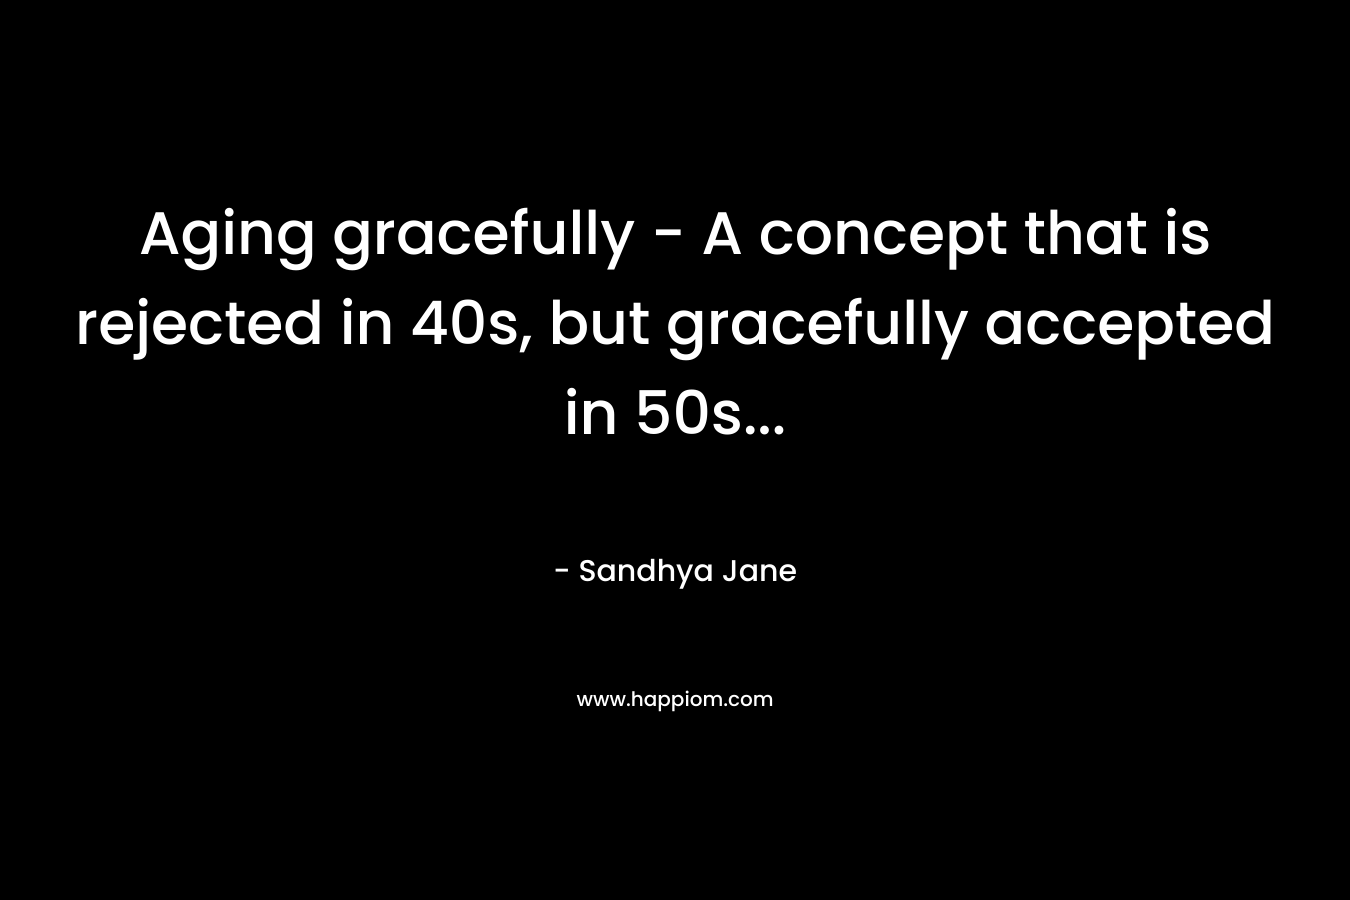 Aging gracefully - A concept that is rejected in 40s, but gracefully accepted in 50s...